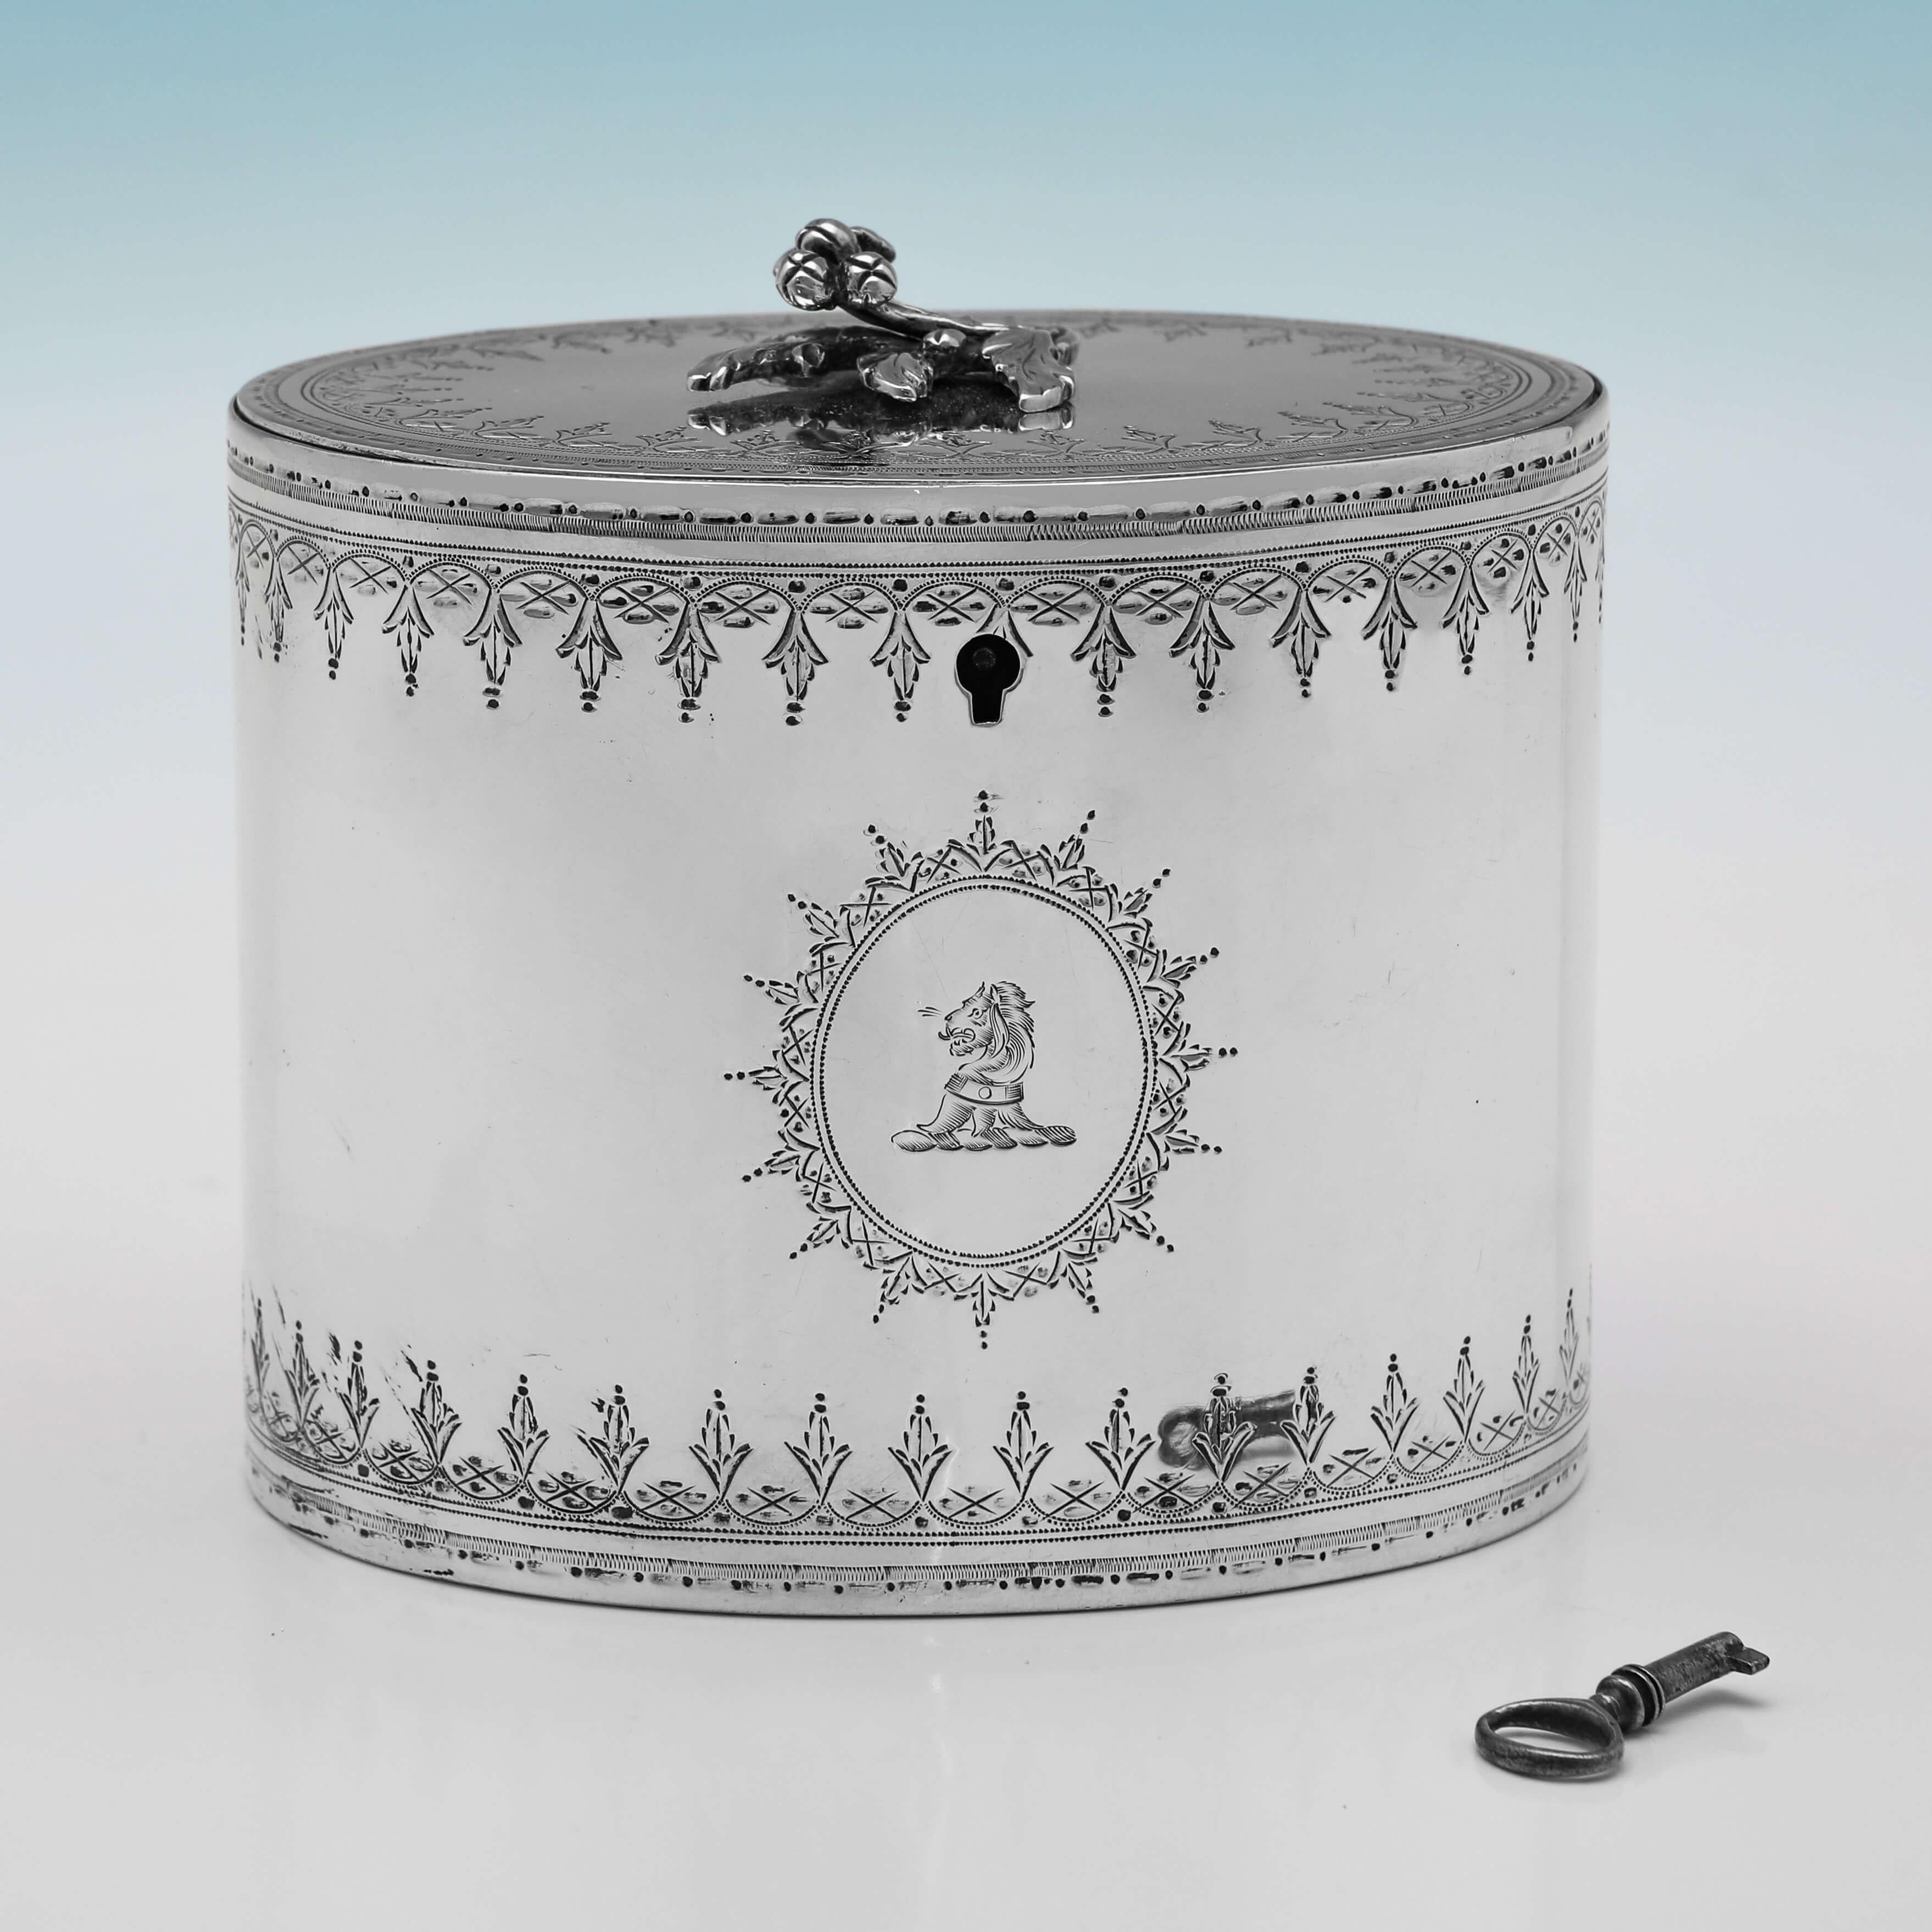 English Stunning Engraved Neoclassical Antique Sterling Silver Tea Caddy - London 1806 For Sale